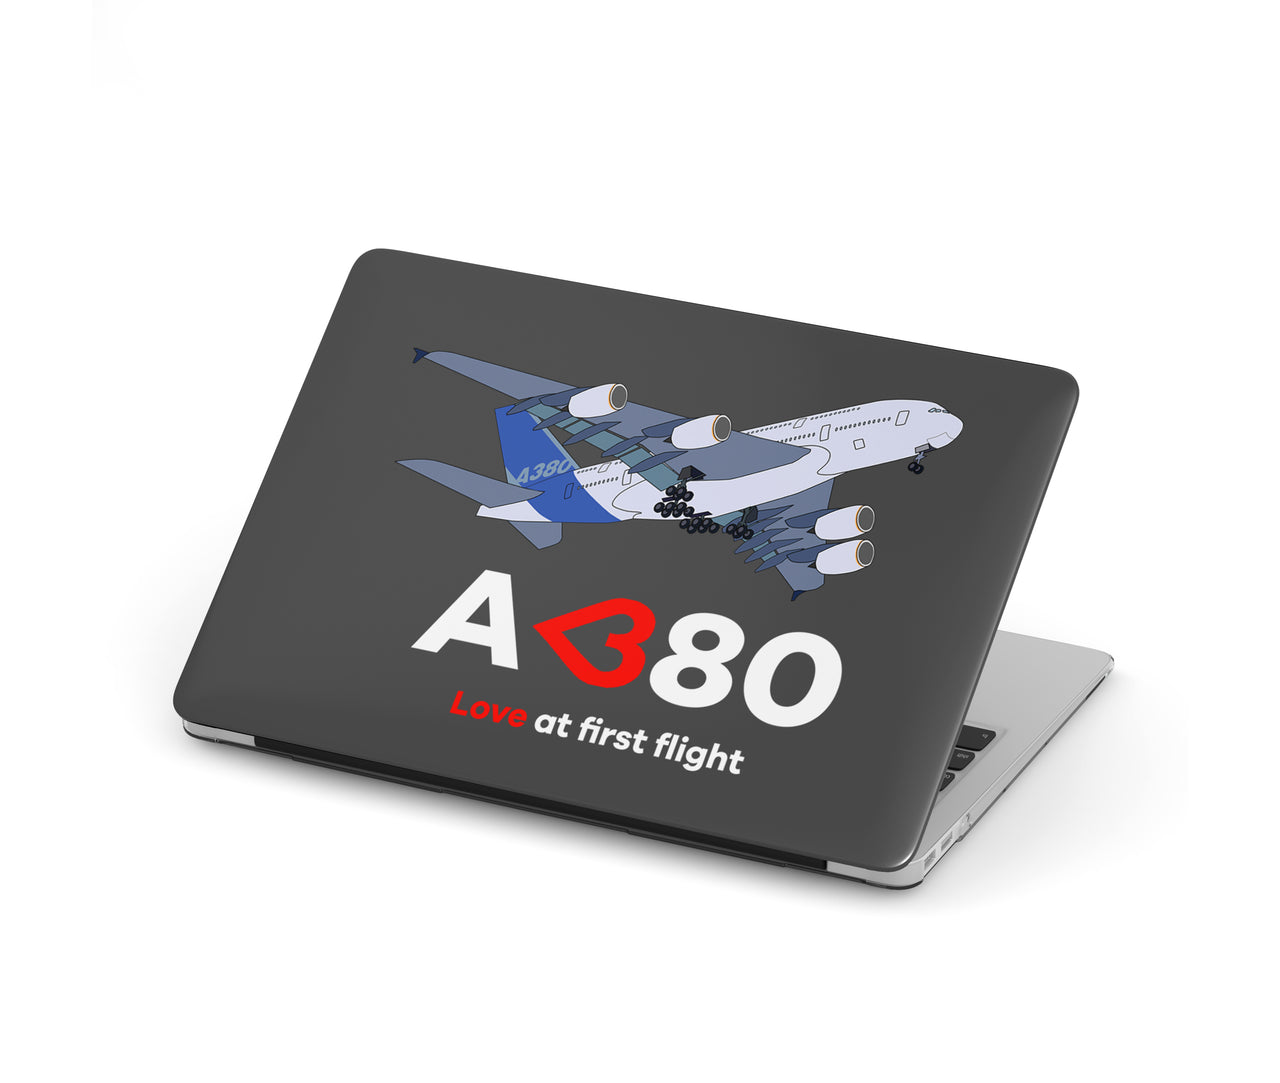 Airbus A380 Love at first flight Designed Macbook Cases